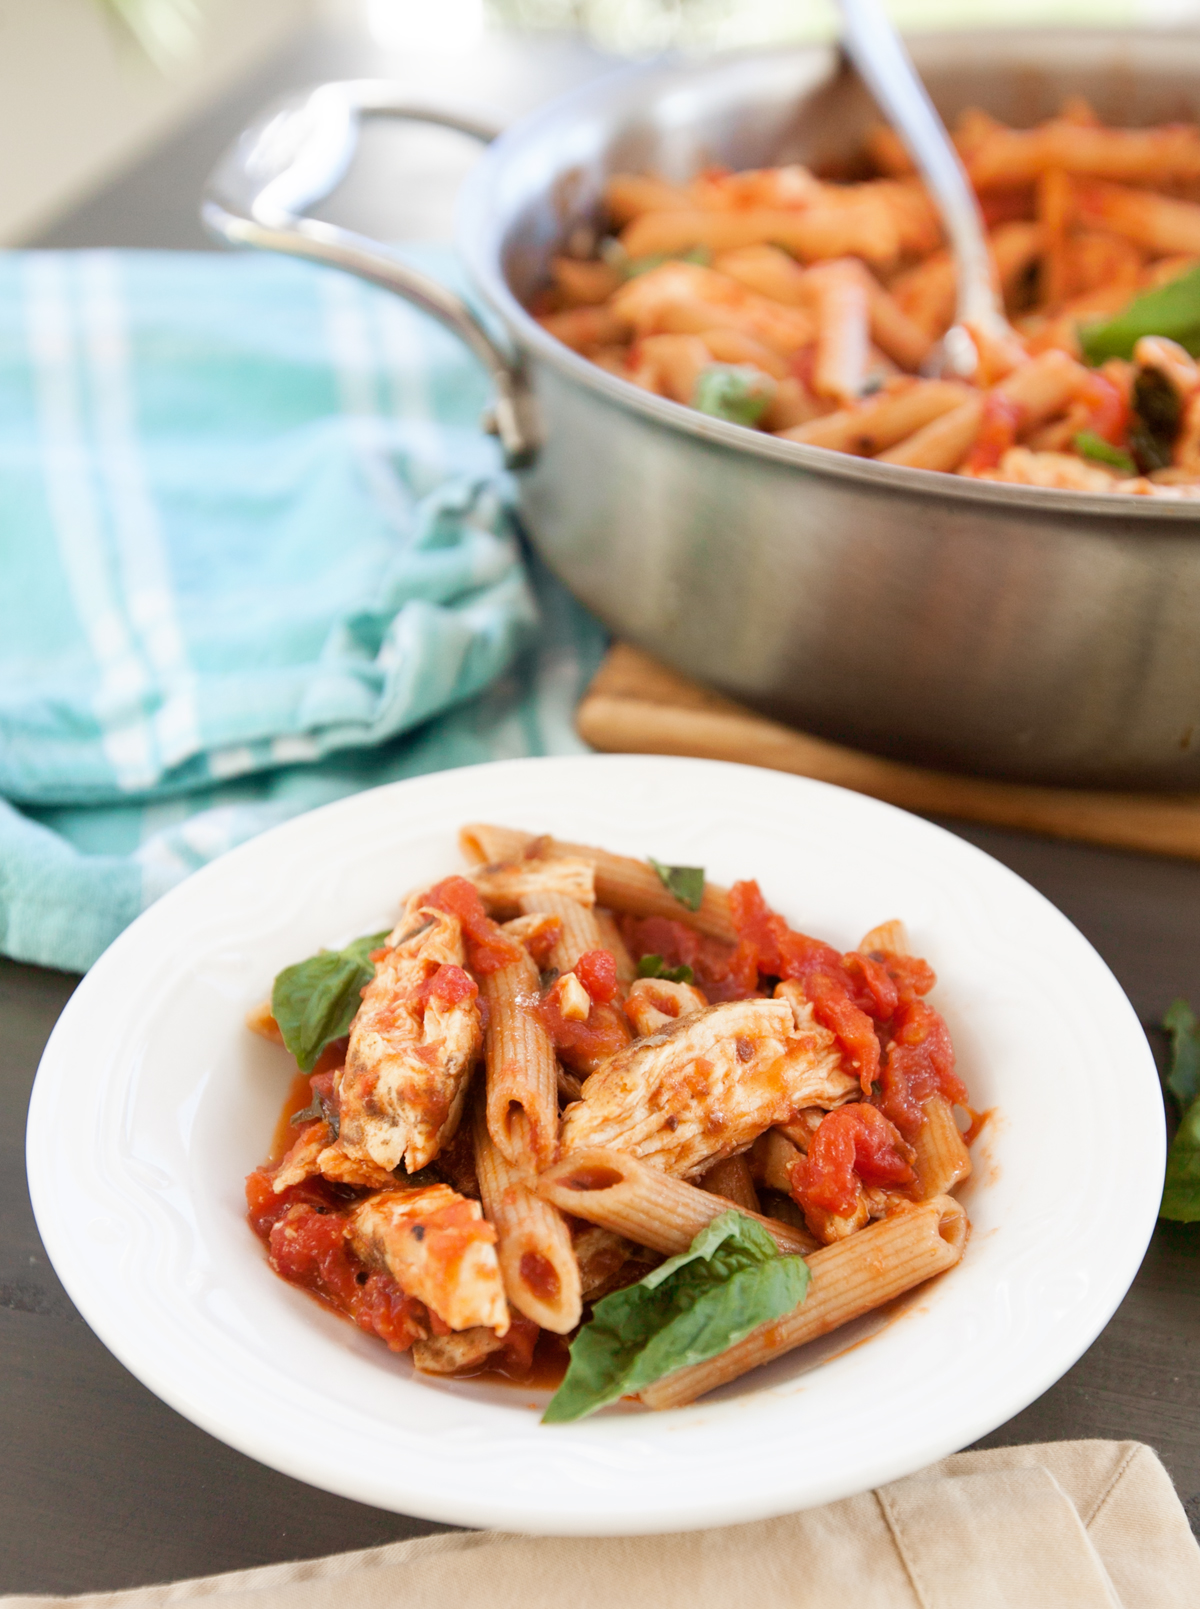 A spicy chicken pasta recipe prepared and dished out into a bowl, garnished with fresh basil.